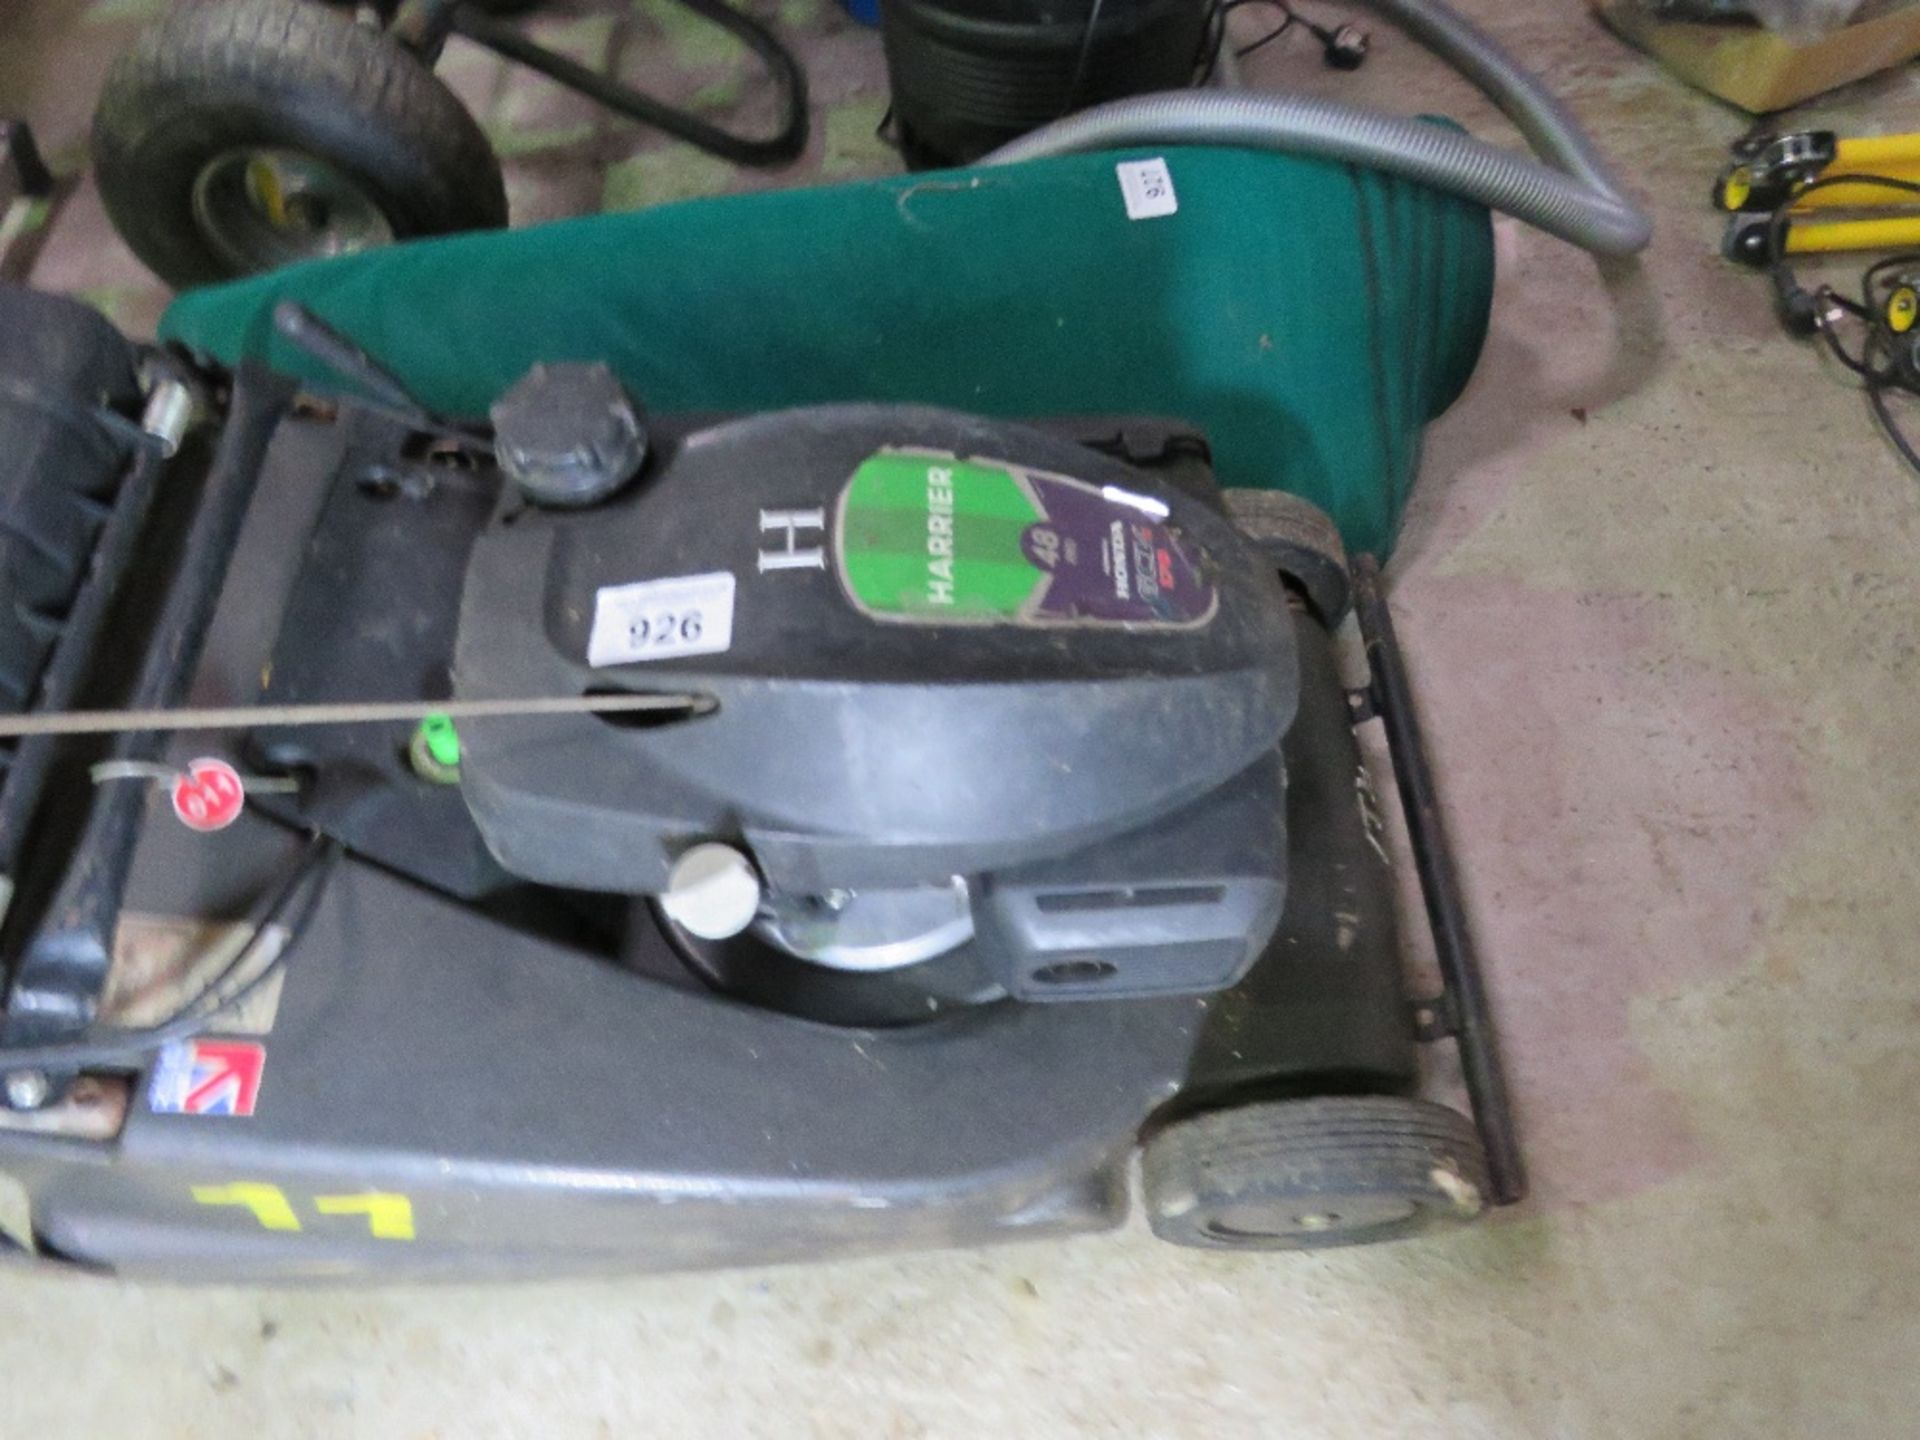 HAYTER 48 PROFESSIONAL MOWER WITH COLLECTOR. DIRECT FROM LANDSCAPE MAINTENANCE COMPANY DUE TO DE - Image 2 of 4